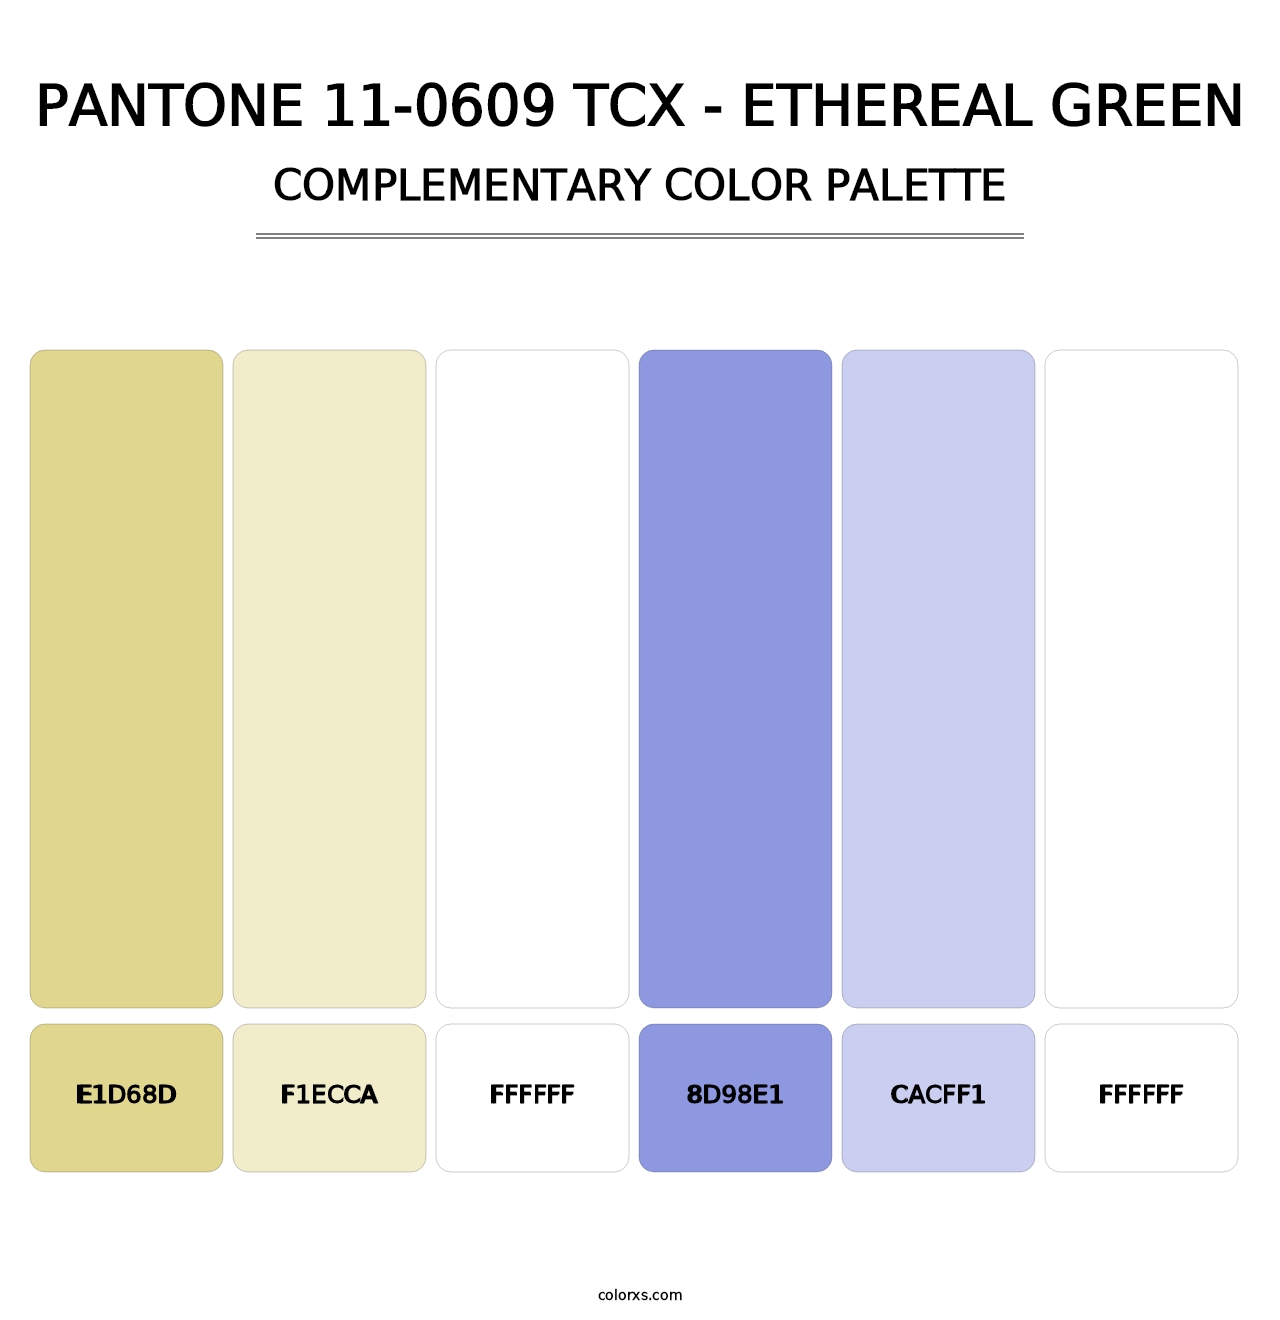 PANTONE 11-0609 TCX - Ethereal Green - Complementary Color Palette